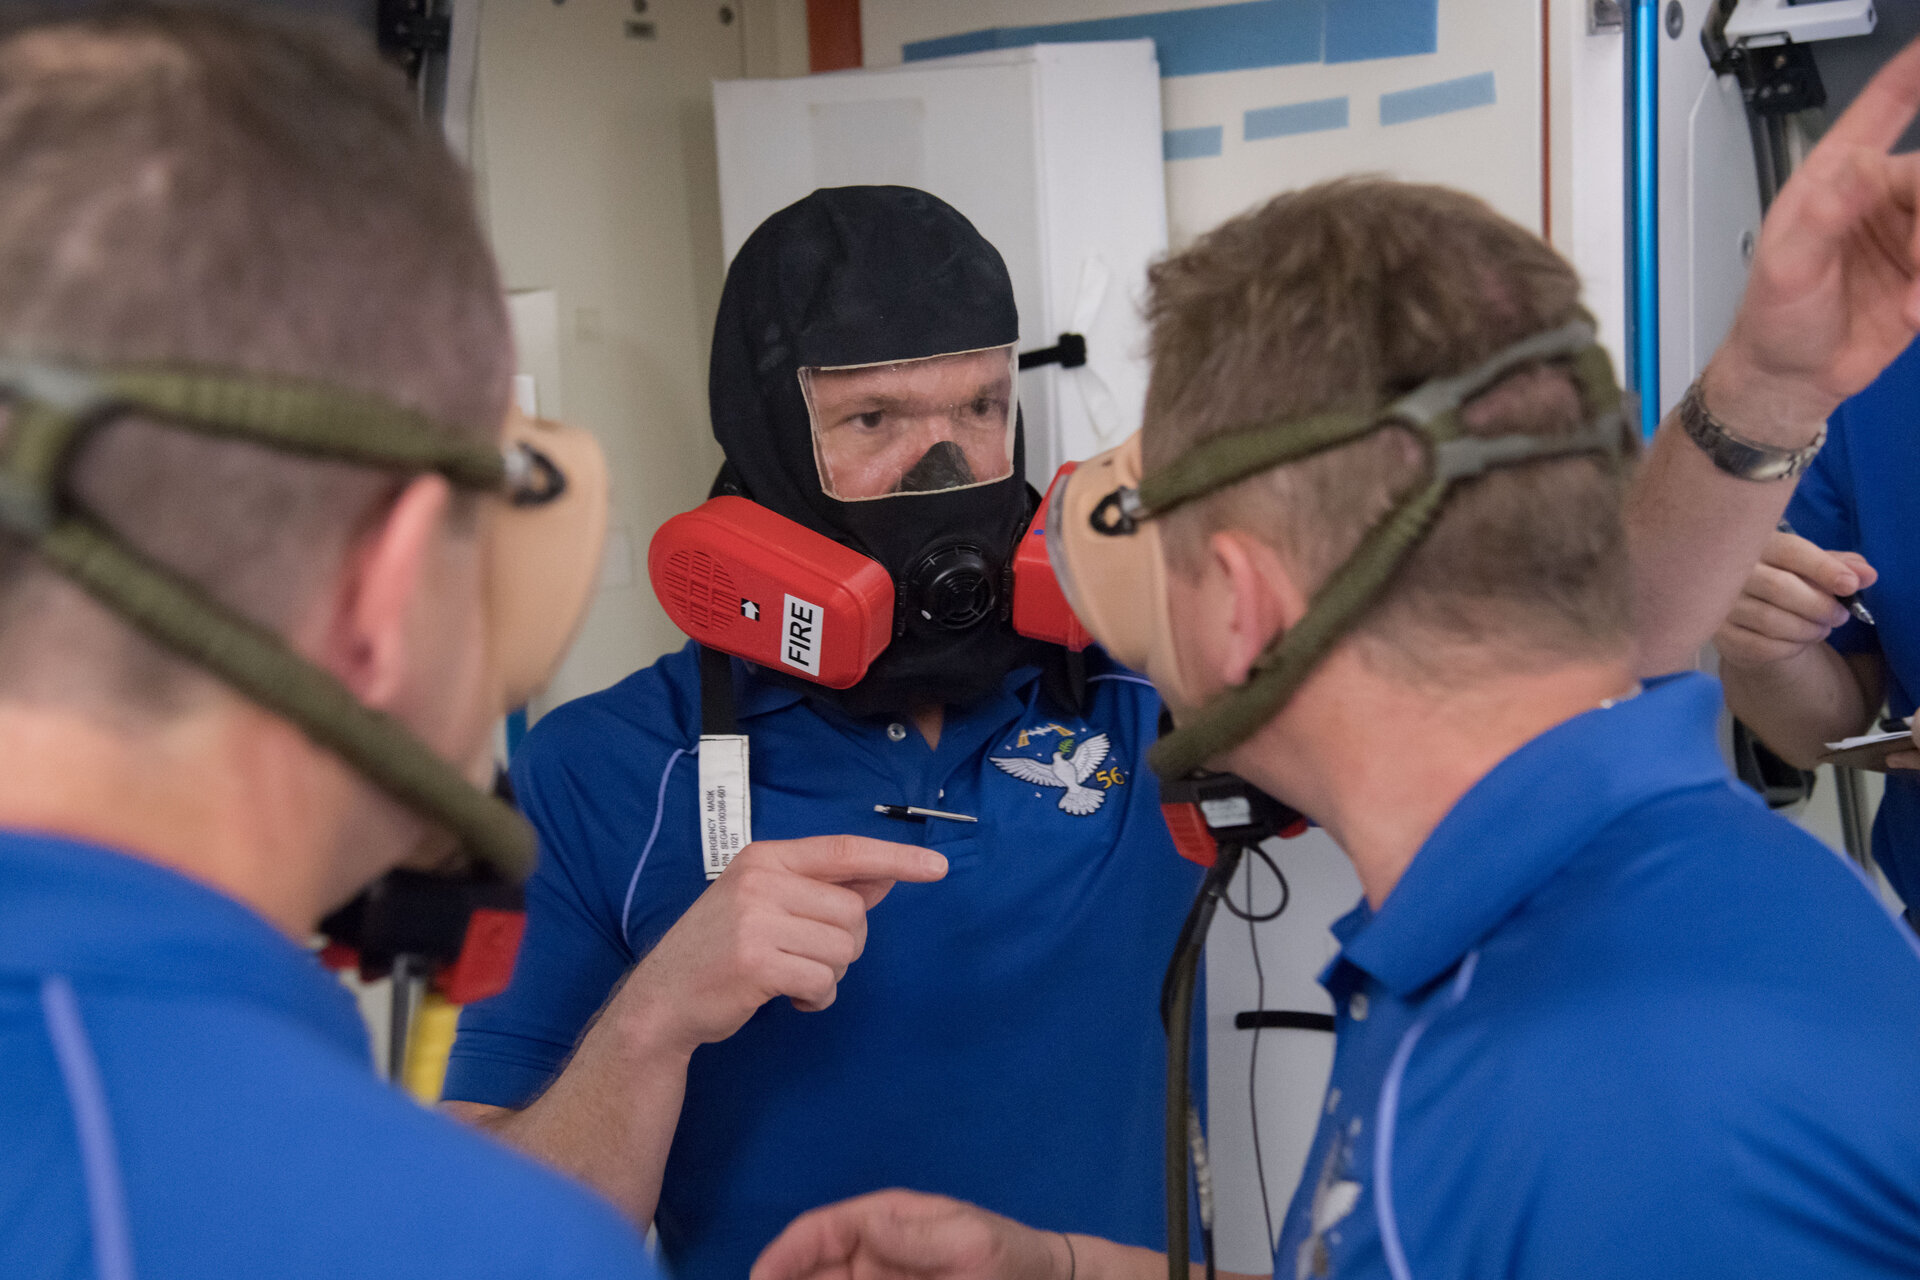 Expedition 56 crew members training